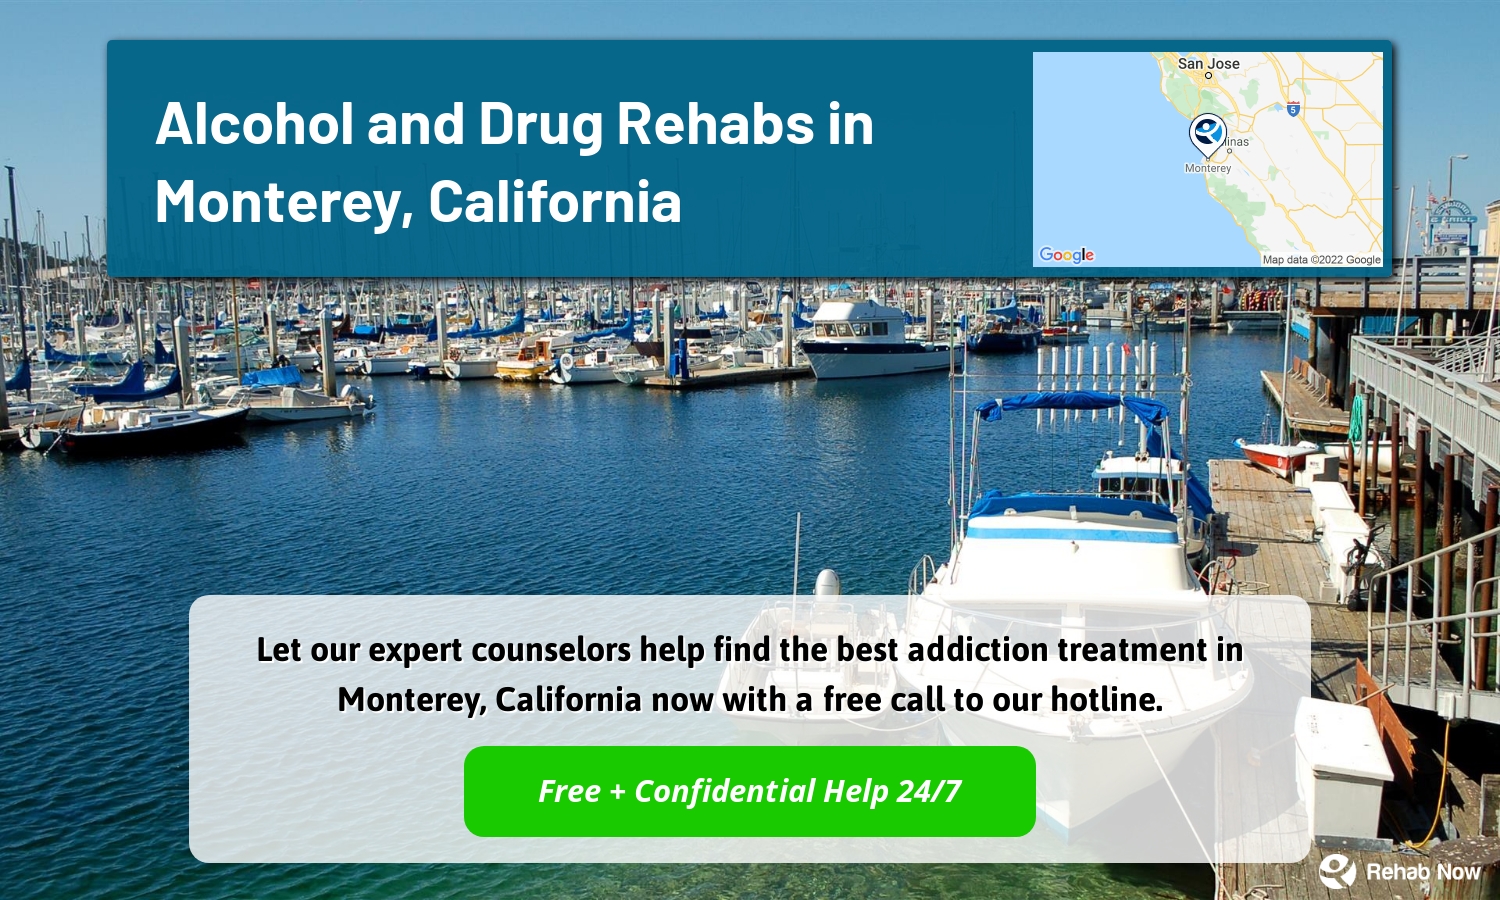 Let our expert counselors help find the best addiction treatment in Monterey, California now with a free call to our hotline.